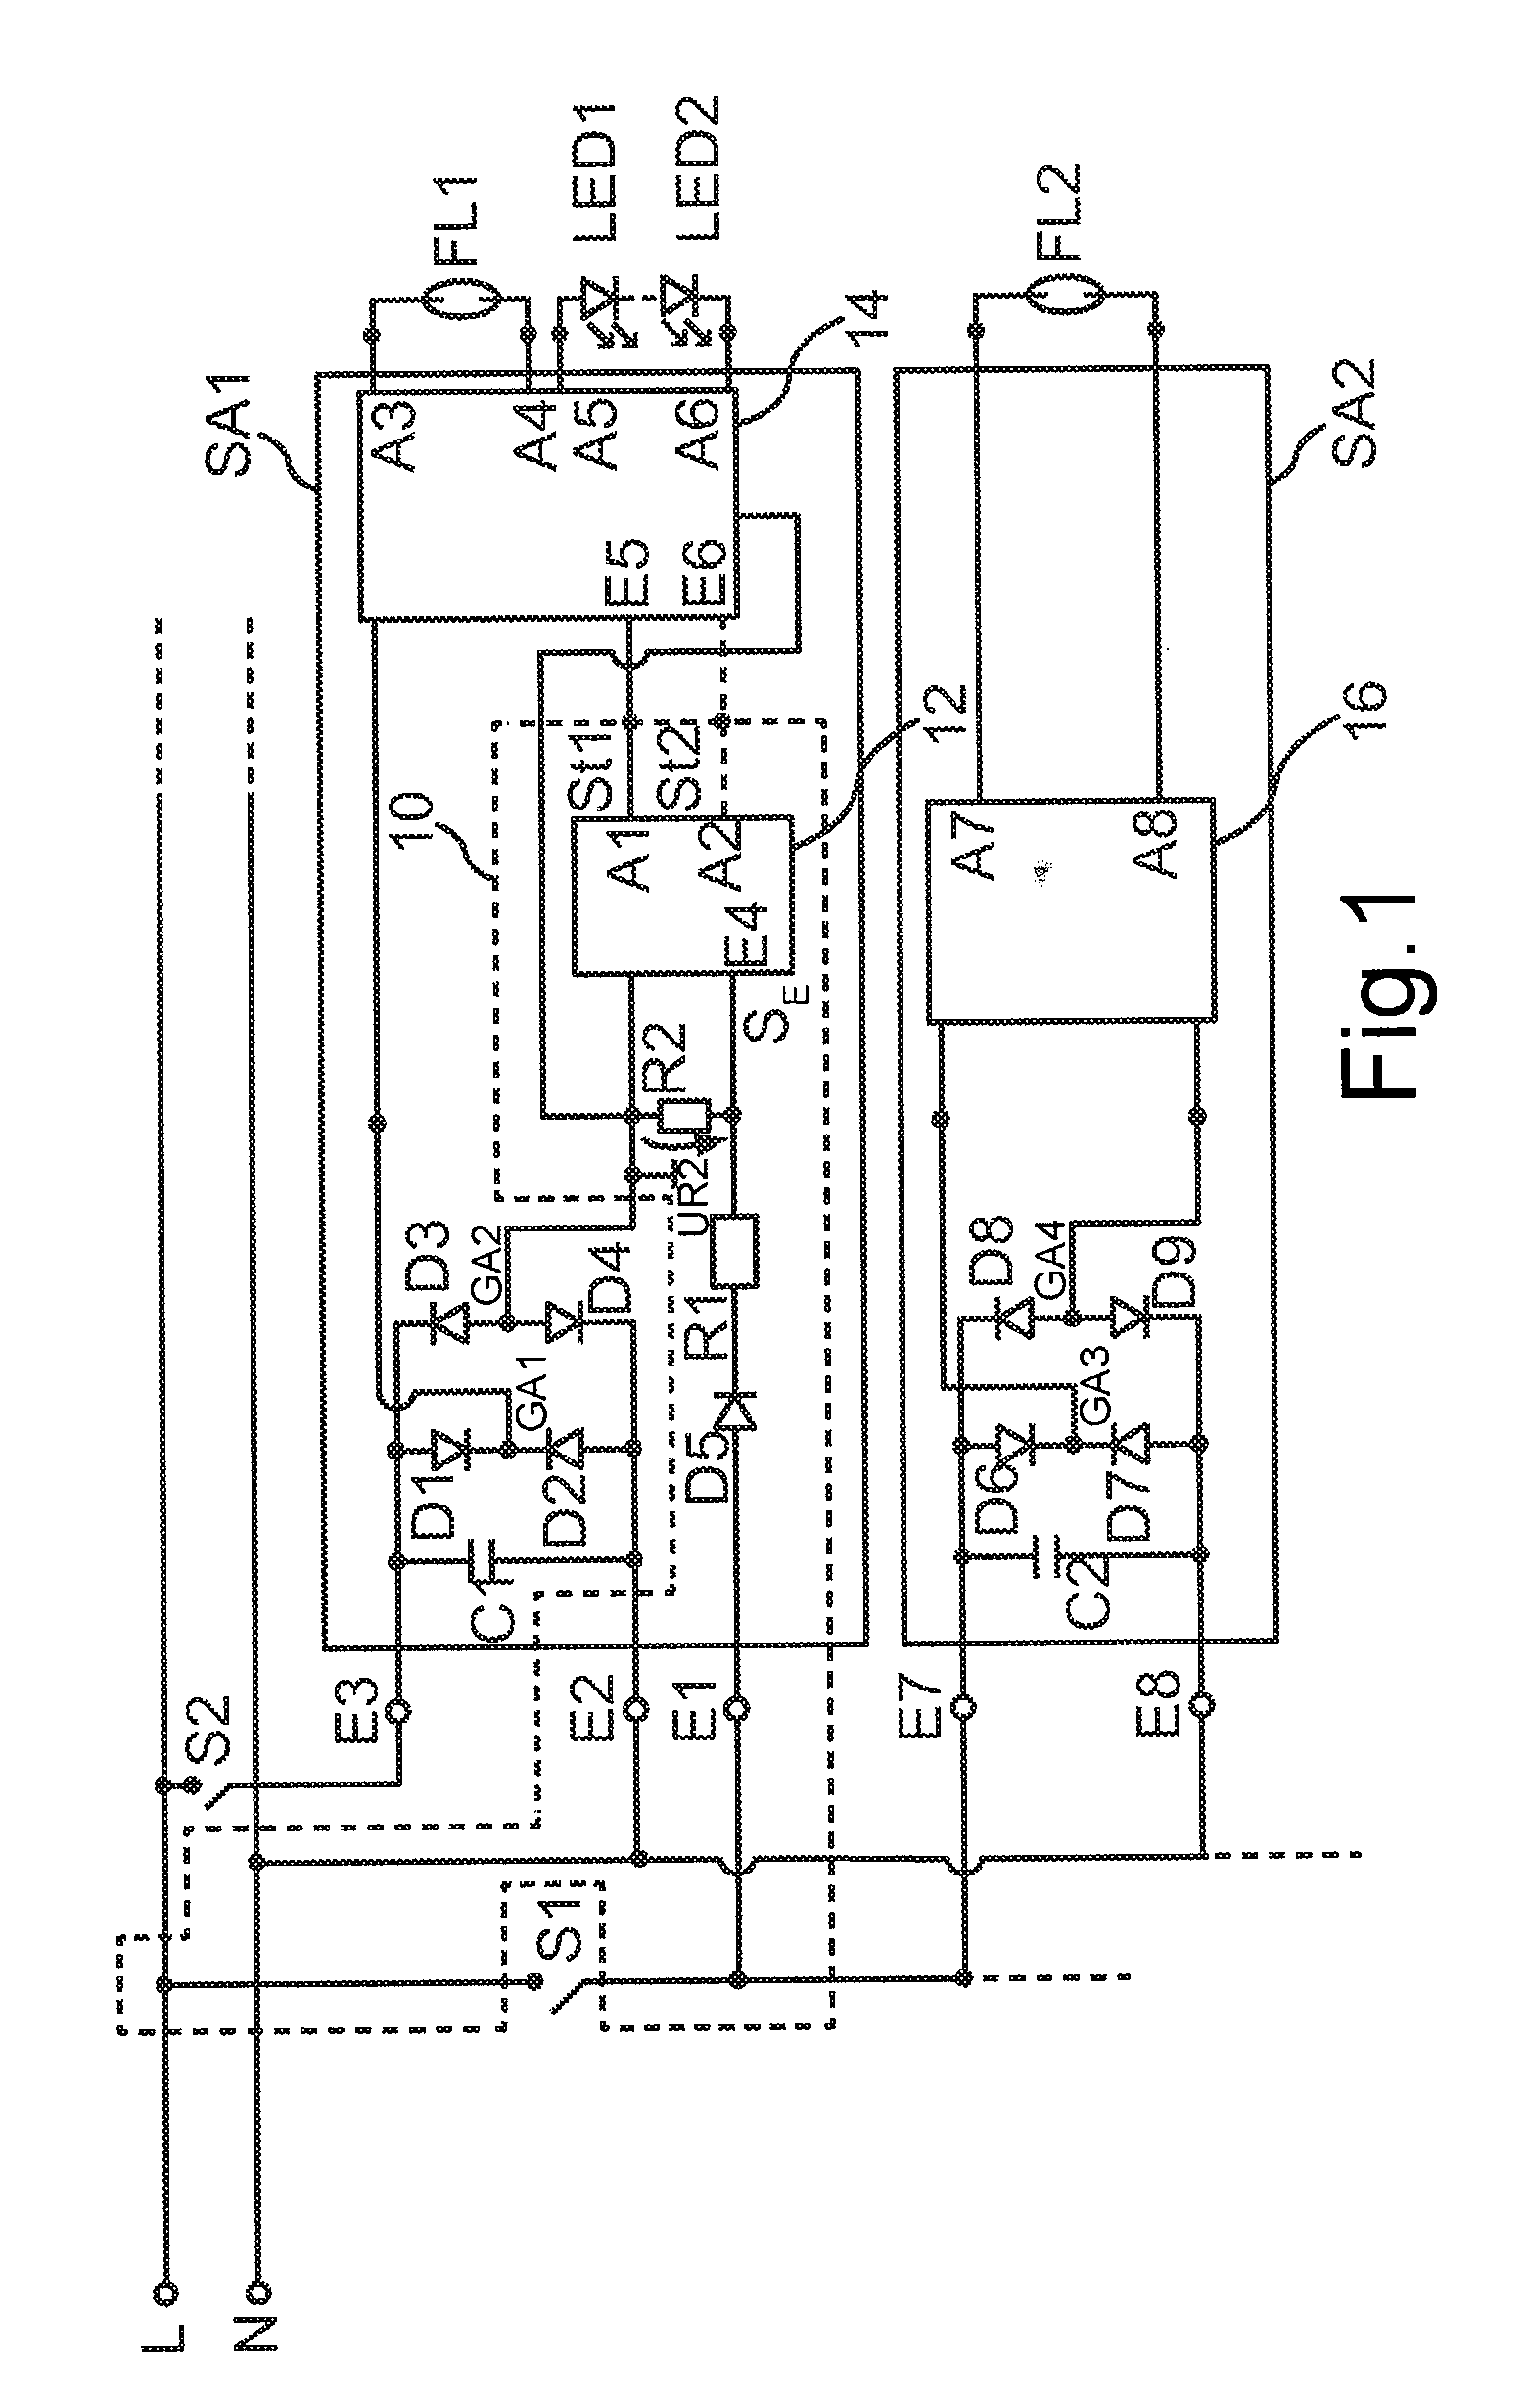 Control Apparatus for a Circuit Arrangement for Operating a Light Source, as well as a System Comprising a Circuit Arrangement and a Circuit Arrangement, as well as a Method for Operating a Light Source